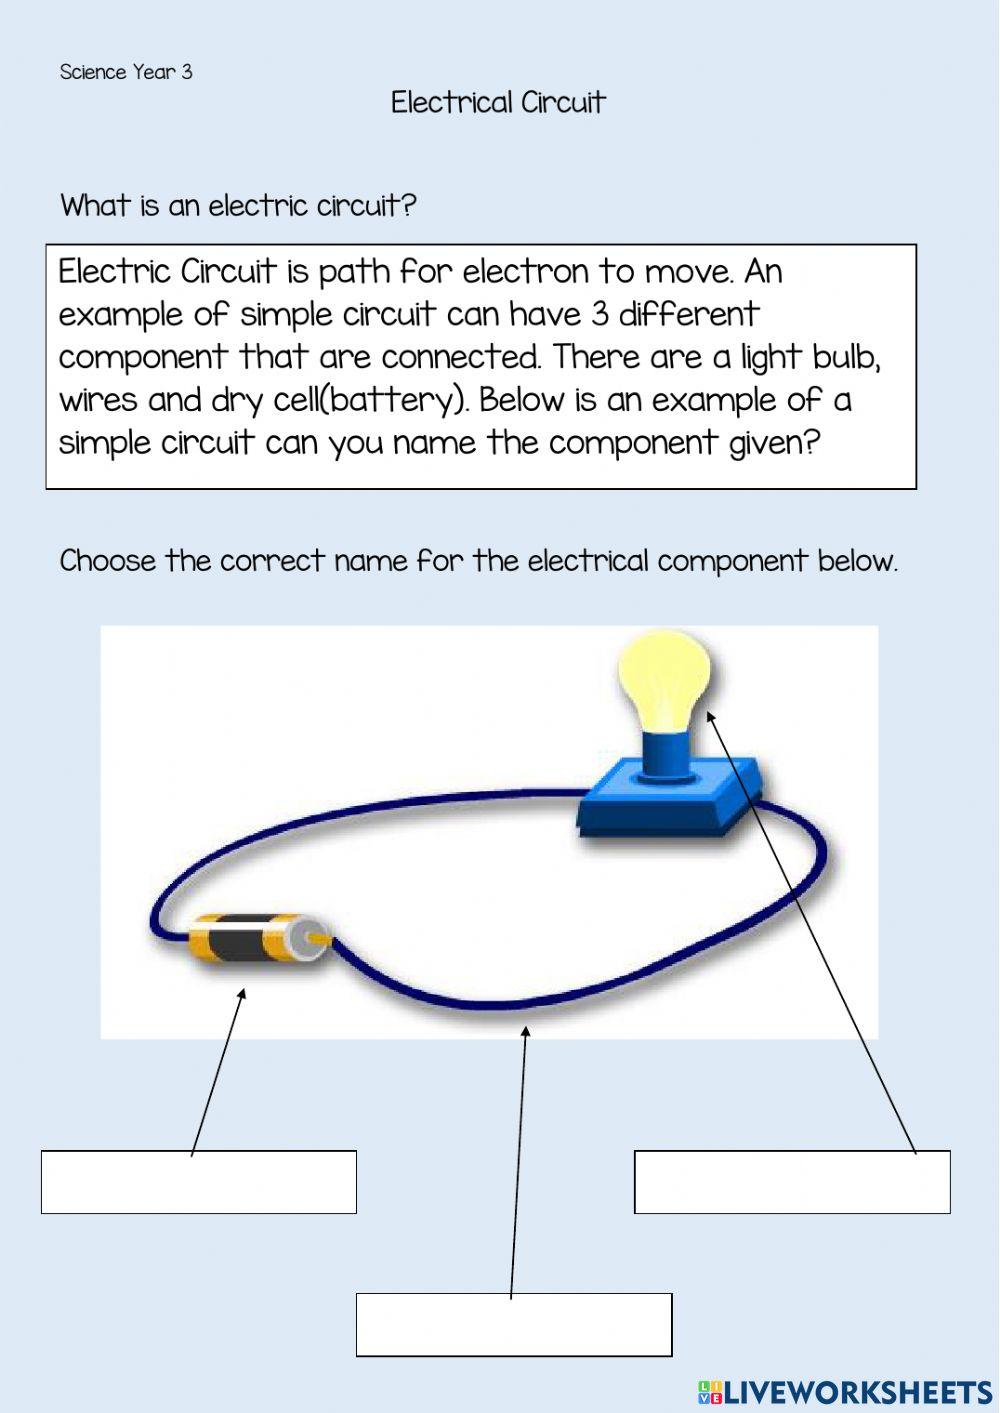 Electric Circuit Component